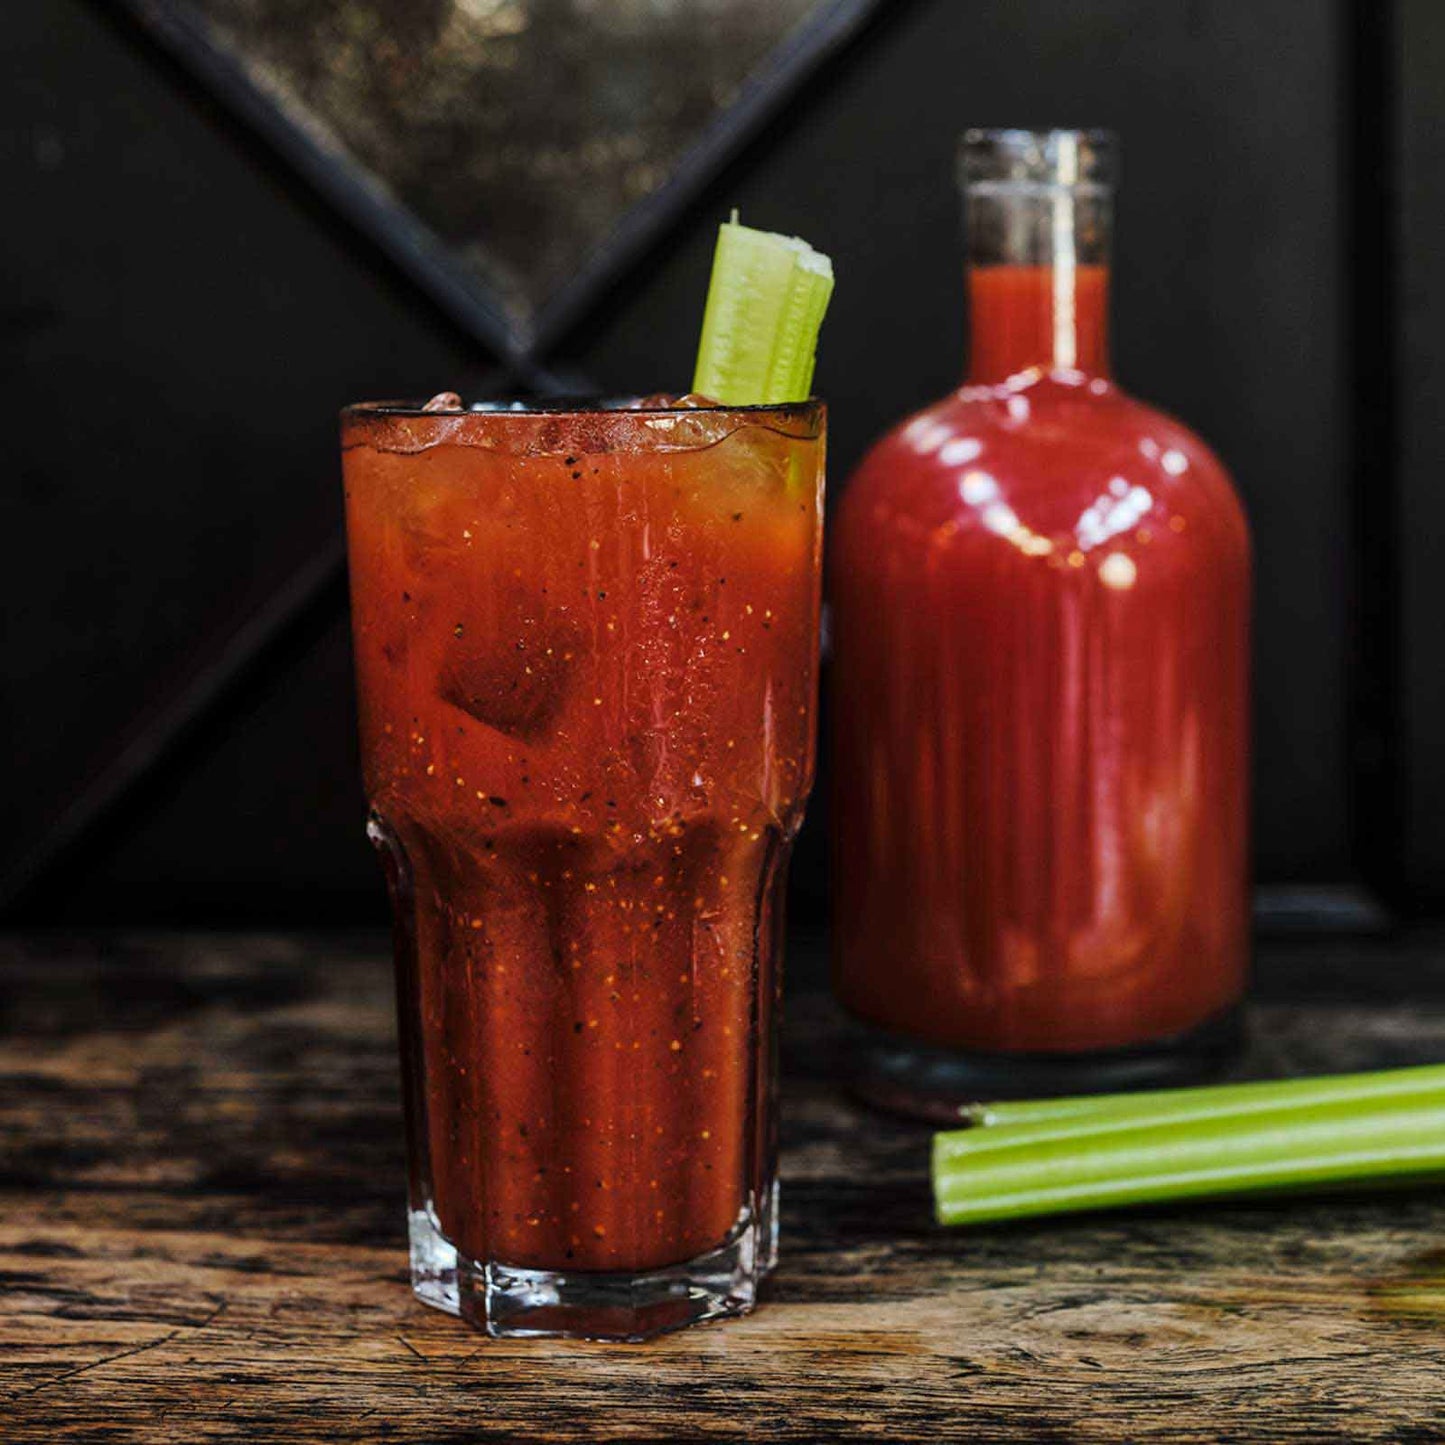 Dishoom Bloody Mary & Bacon Naan Roll Meal Kit